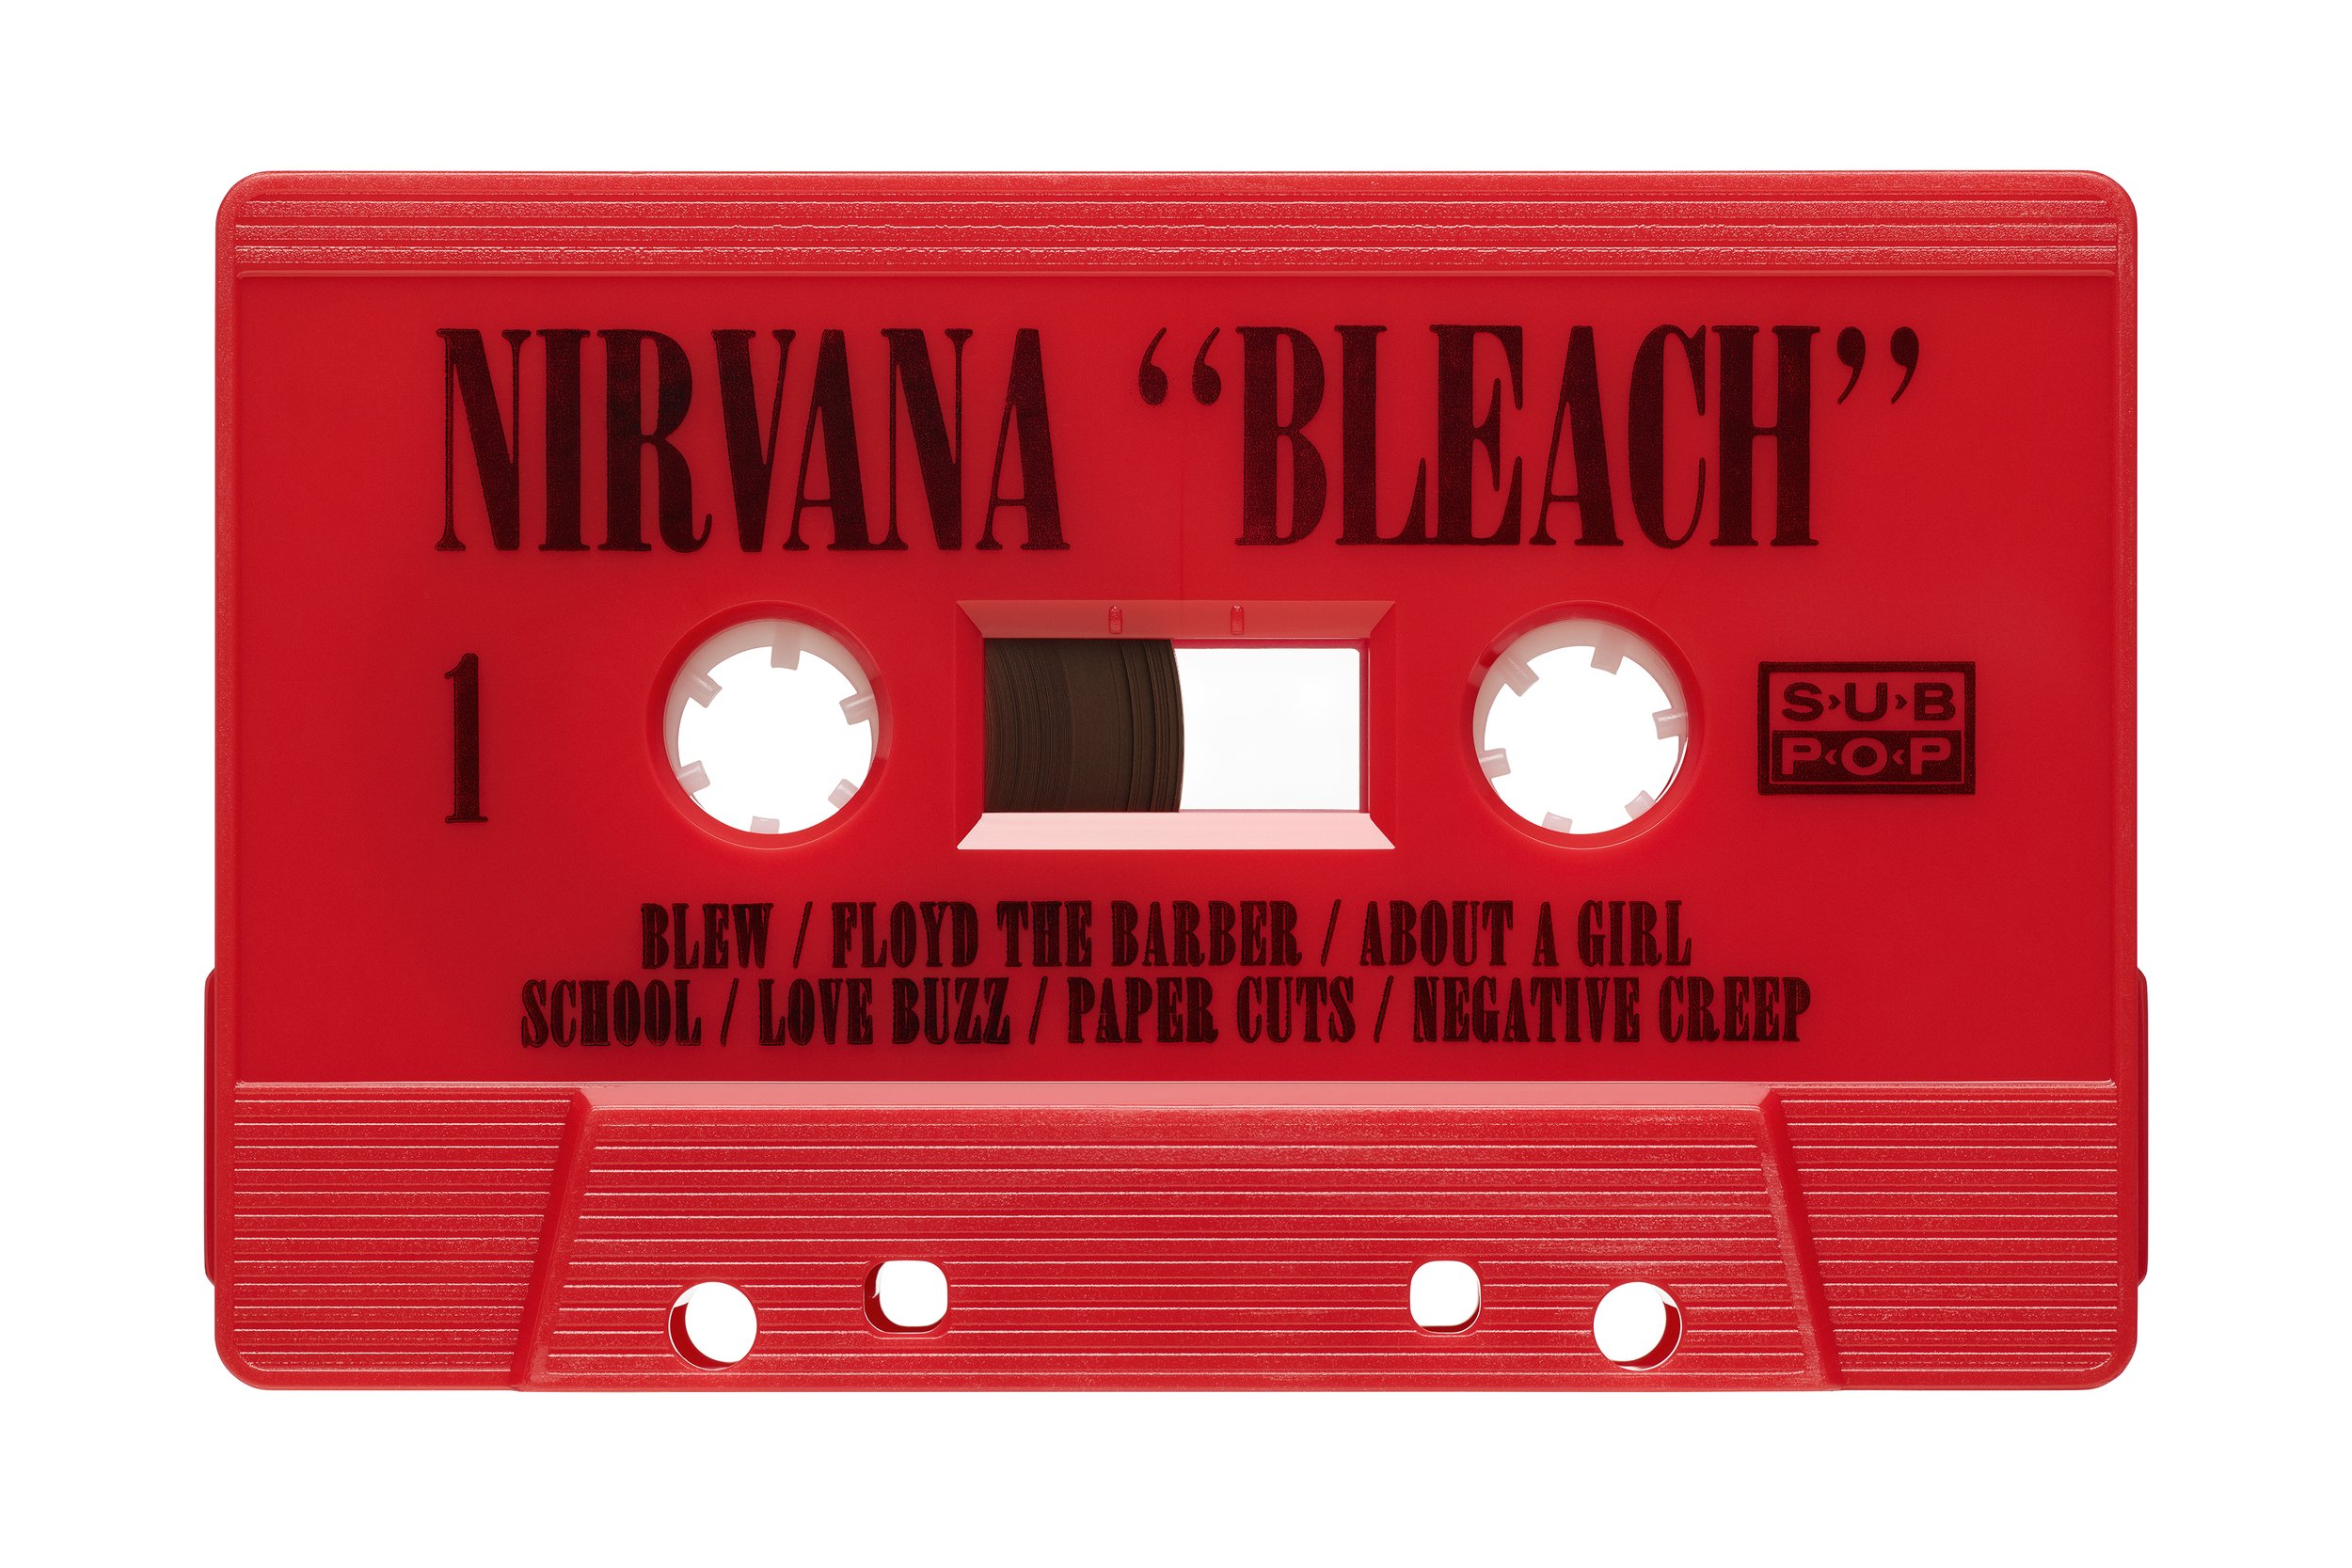  Nirvana - Bleach (Red)  Available through   Clic Gallery   in New York.    Contact   